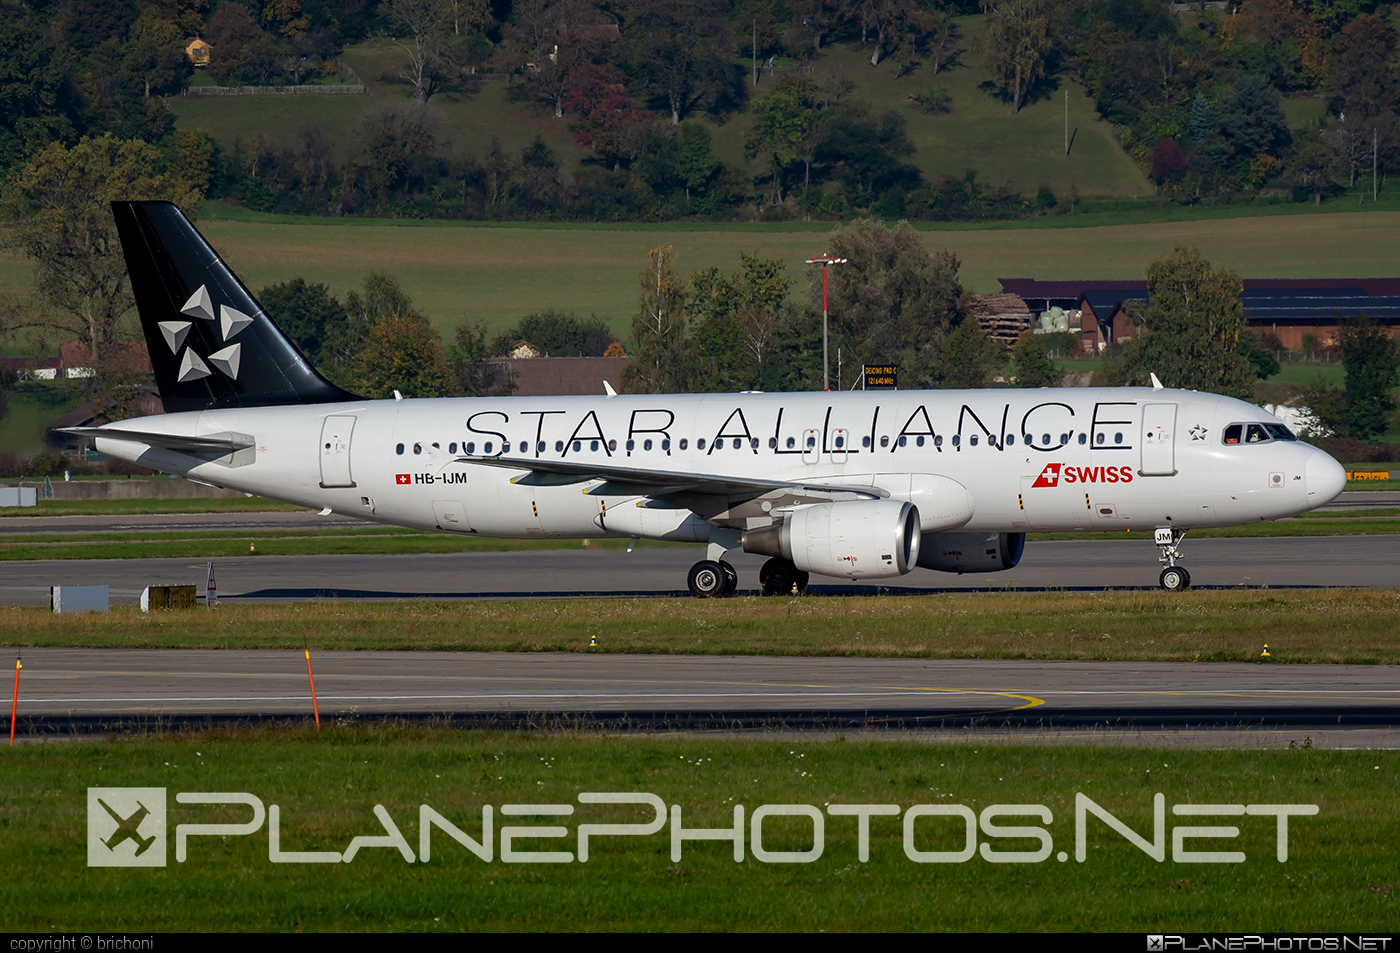 Airbus A320-214 - HB-IJM operated by Swiss International Air Lines #a320 #a320family #airbus #airbus320 #staralliance #swiss #swissairlines